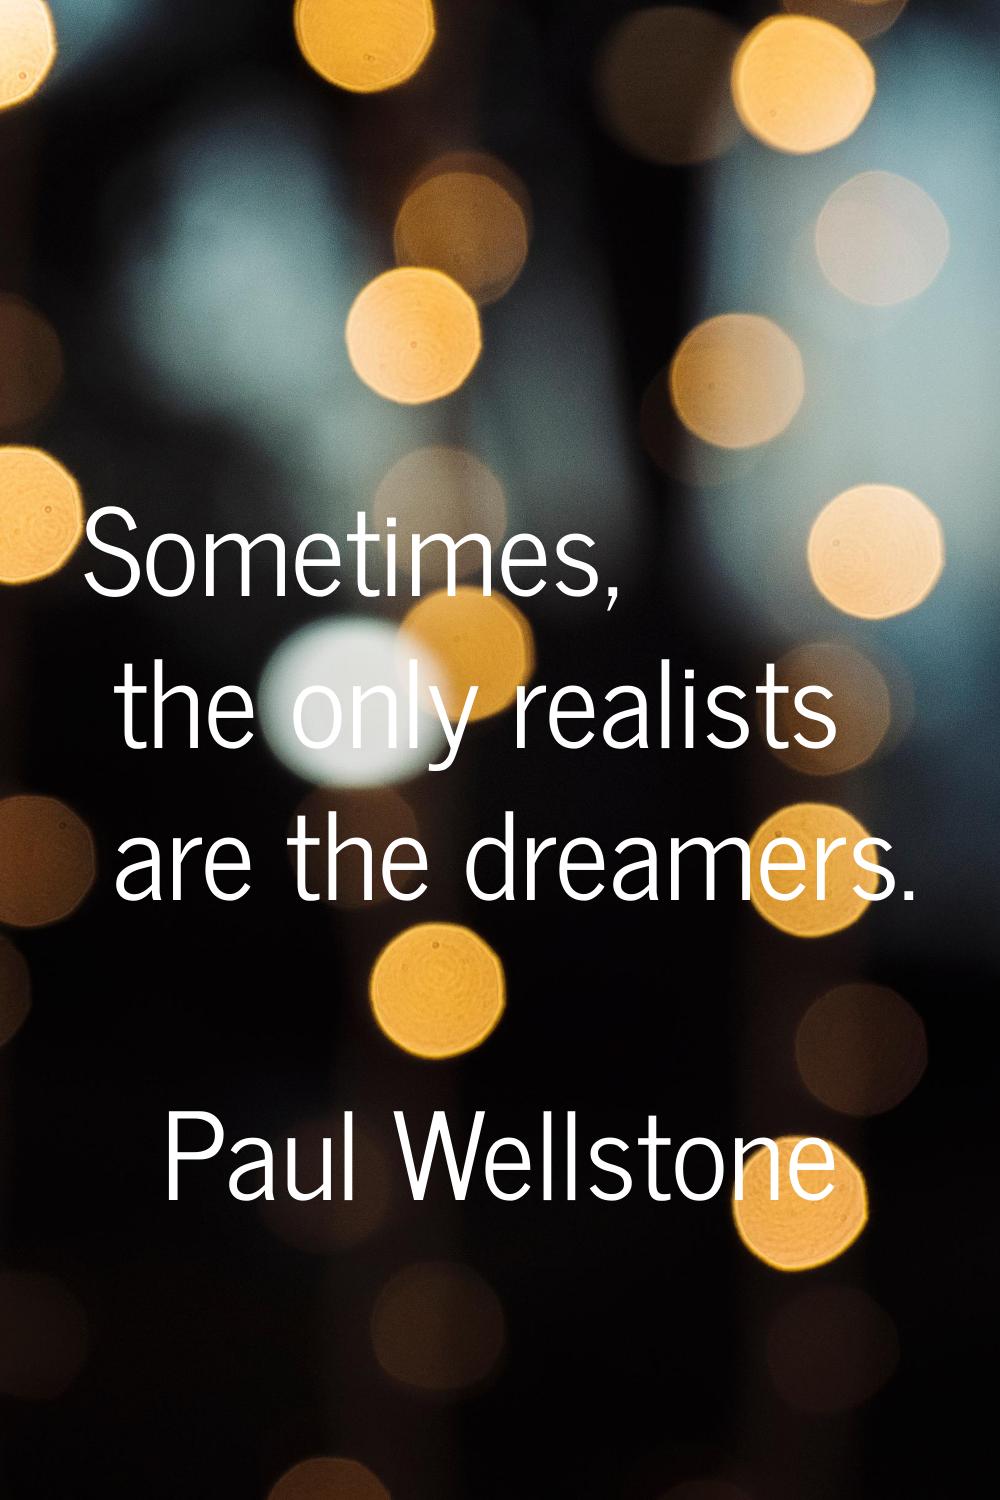 Sometimes, the only realists are the dreamers.